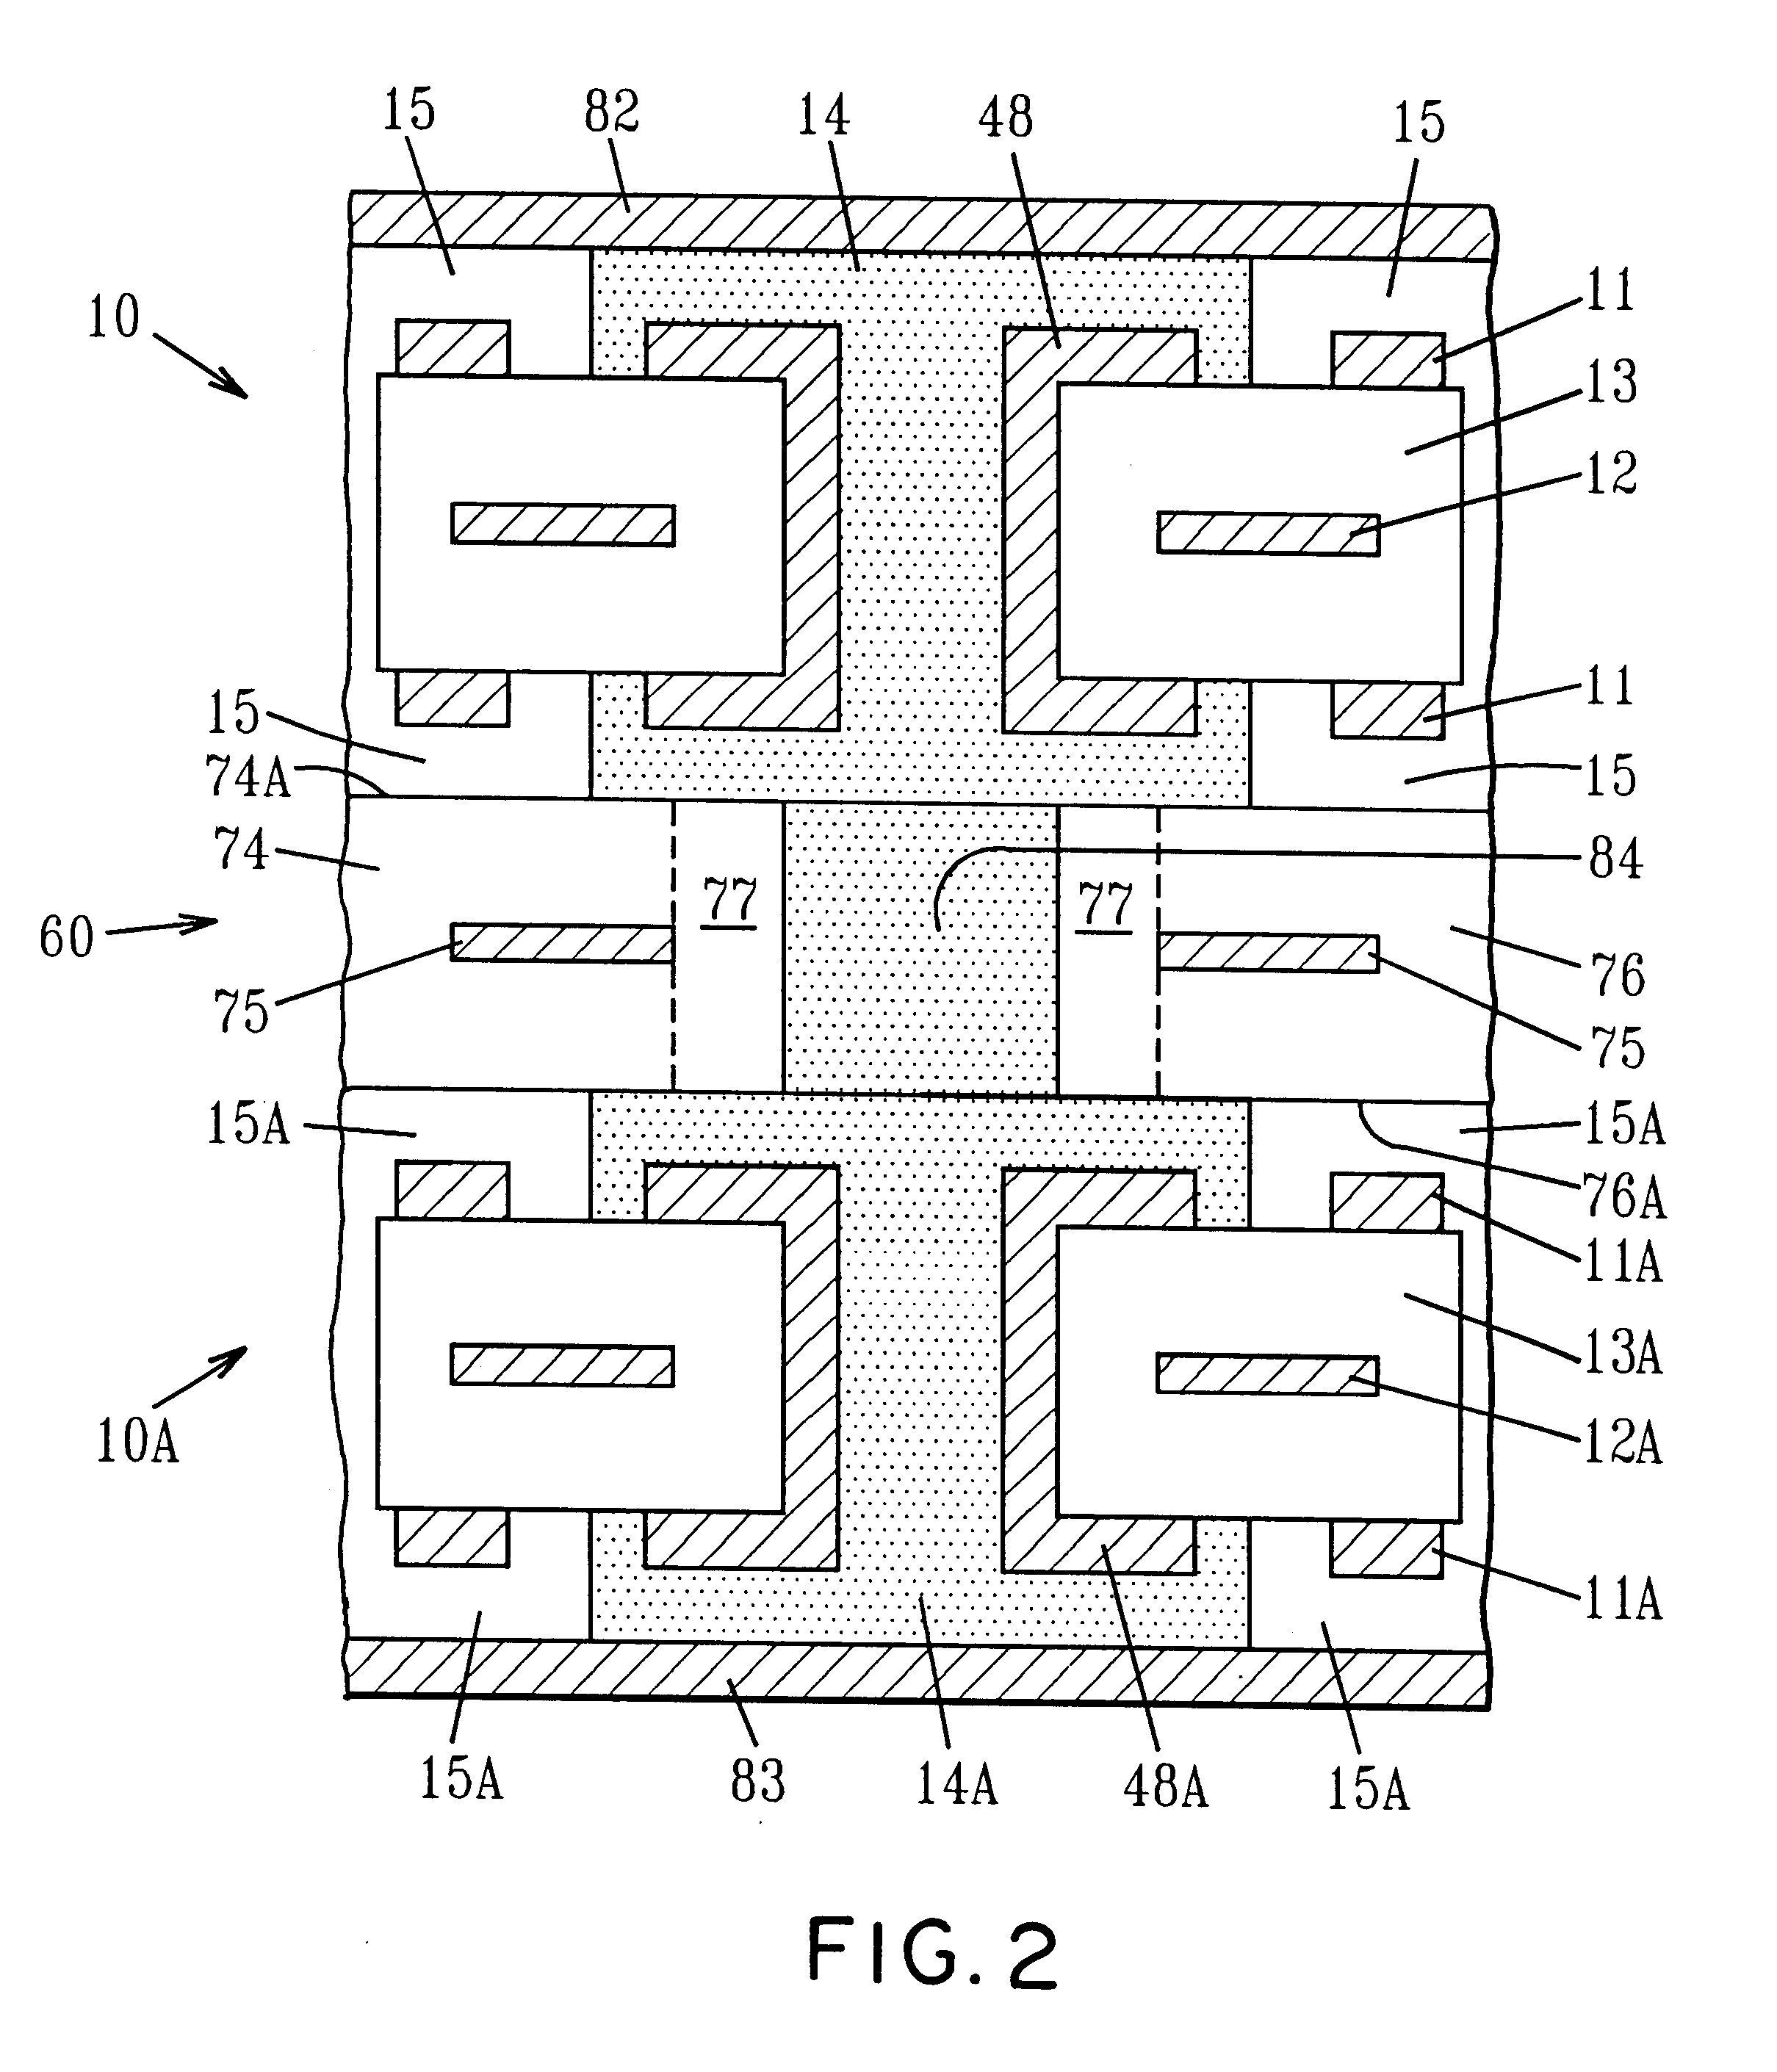 Composite laminate circuit structure and methods of interconnecting the same